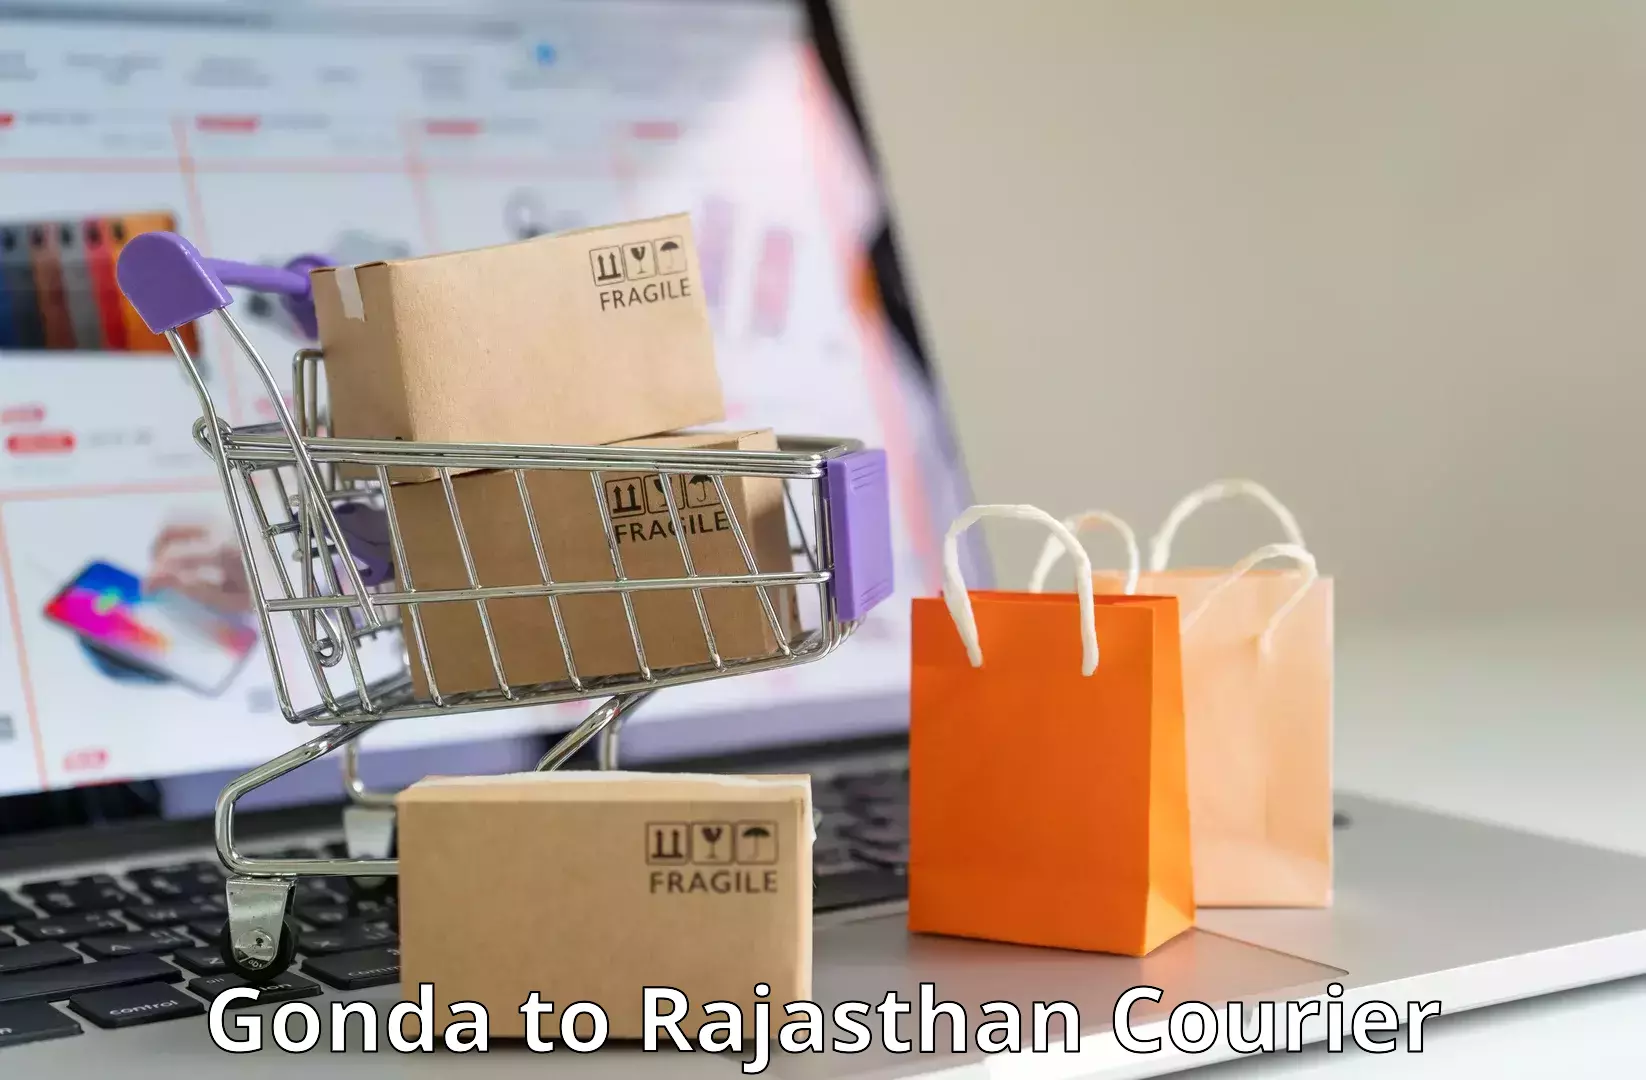 Package delivery network Gonda to Nadoti